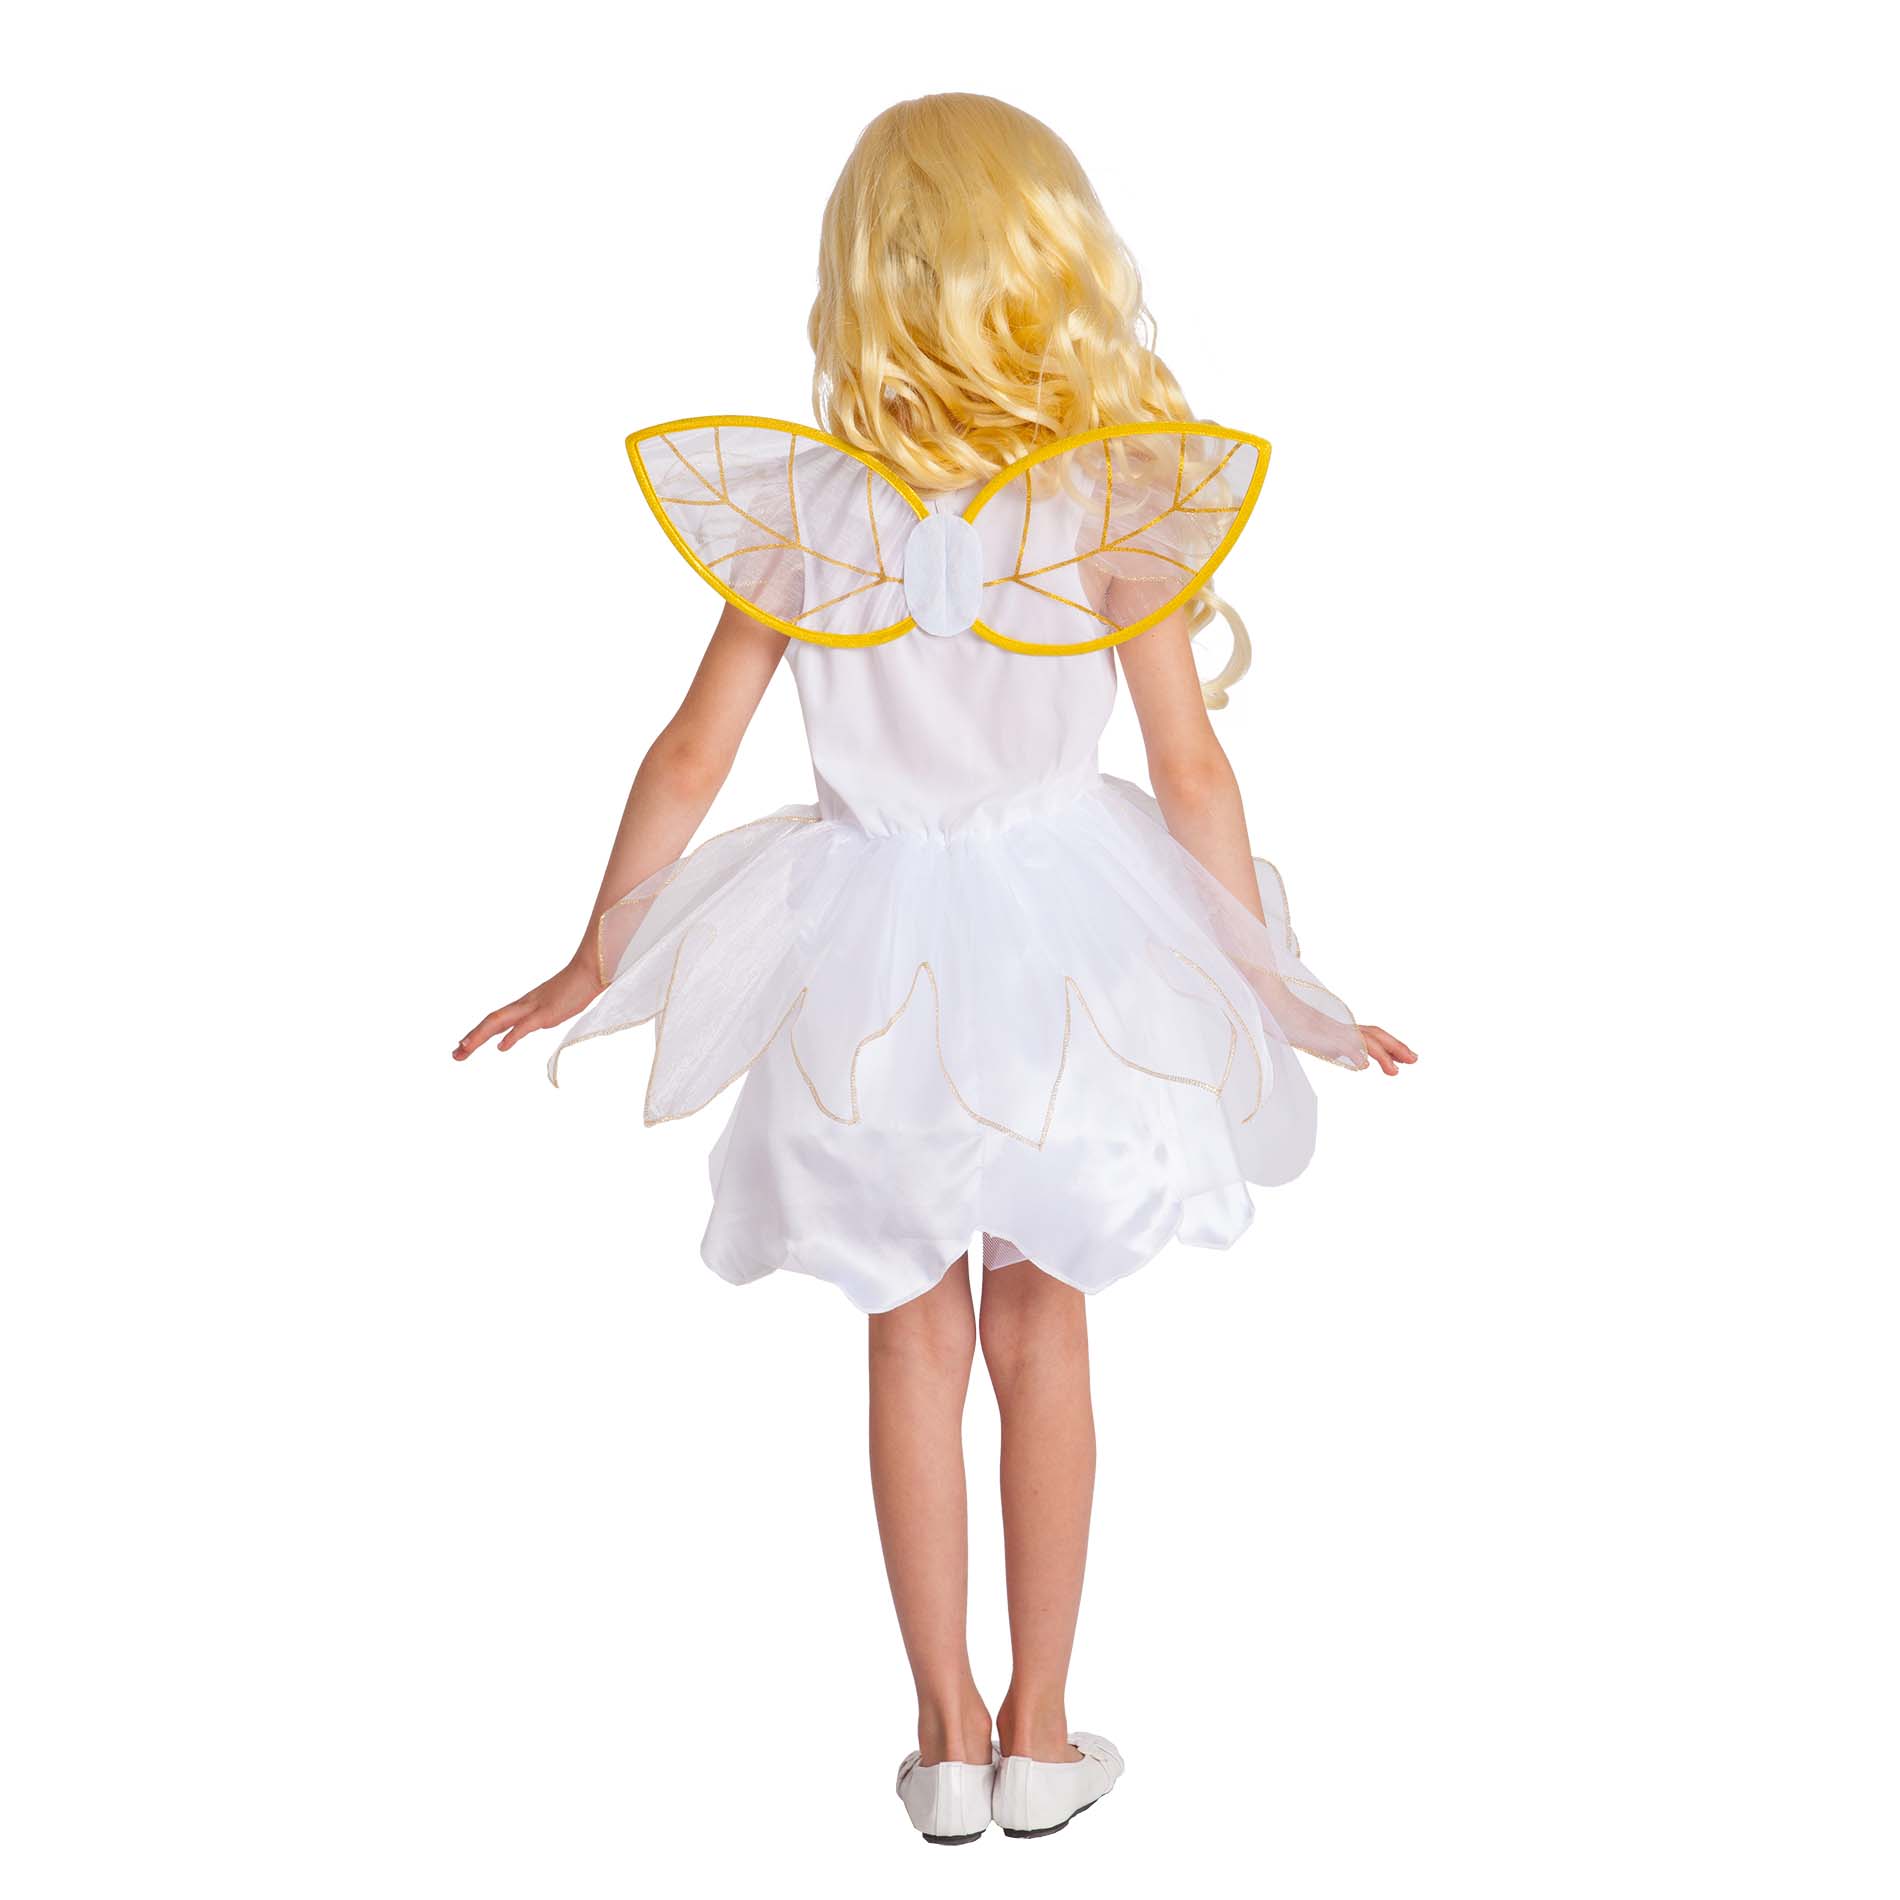 Totally Ghoul Golden Fairy Halloween Costume